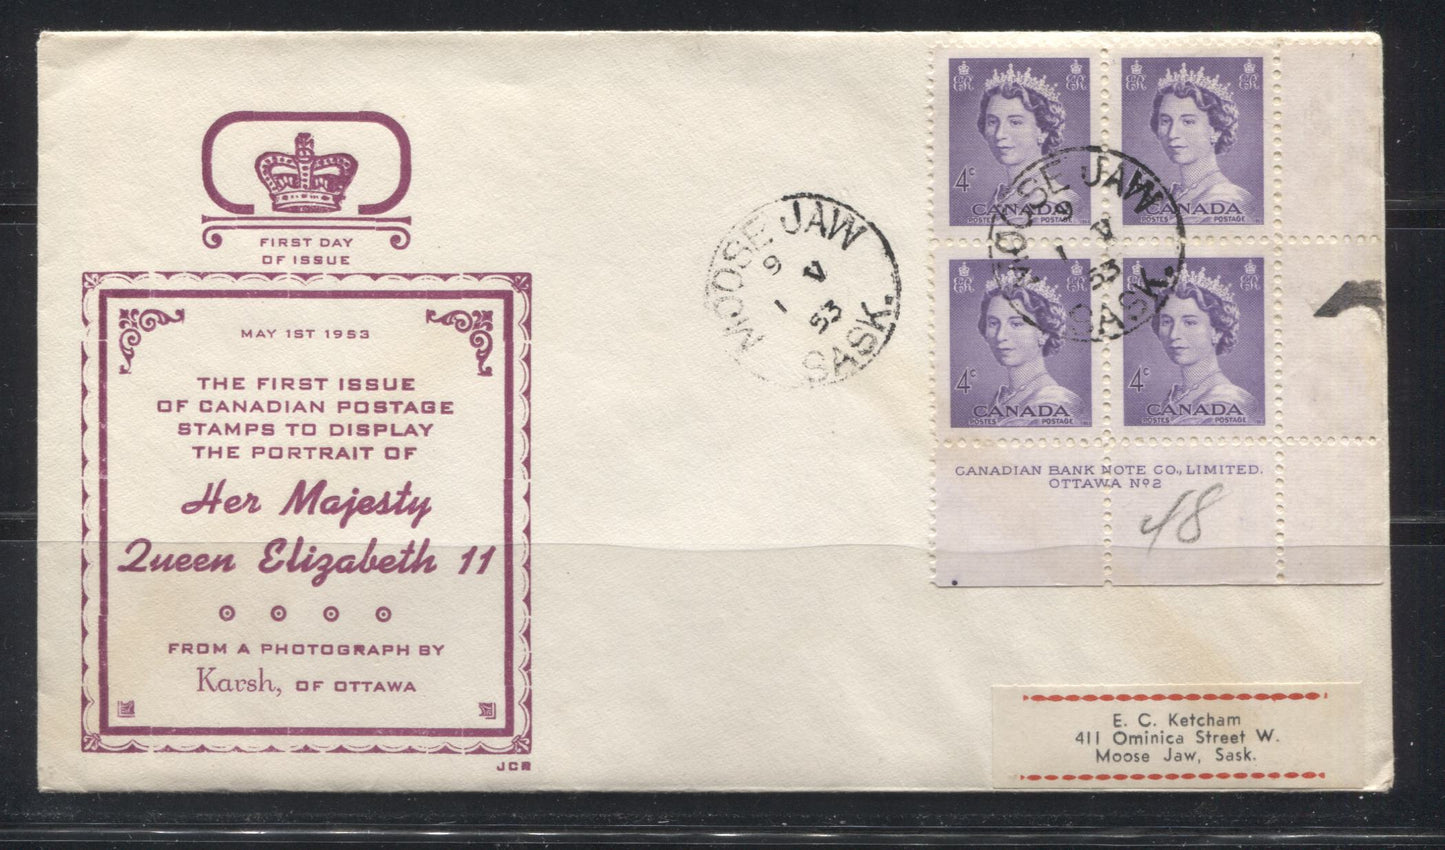 Canada #325, 327, 328 A Block of 4 1c Violet Brown Queen Elizabeth II, A Block of 4 of 3c Carmine Rose Queen Elizabeth II and a Block of 4 of the 4c Violet Queen Elizabeth II, 1953 Karsh Issue A Set of 3 First Day of Release Covers With Blocks